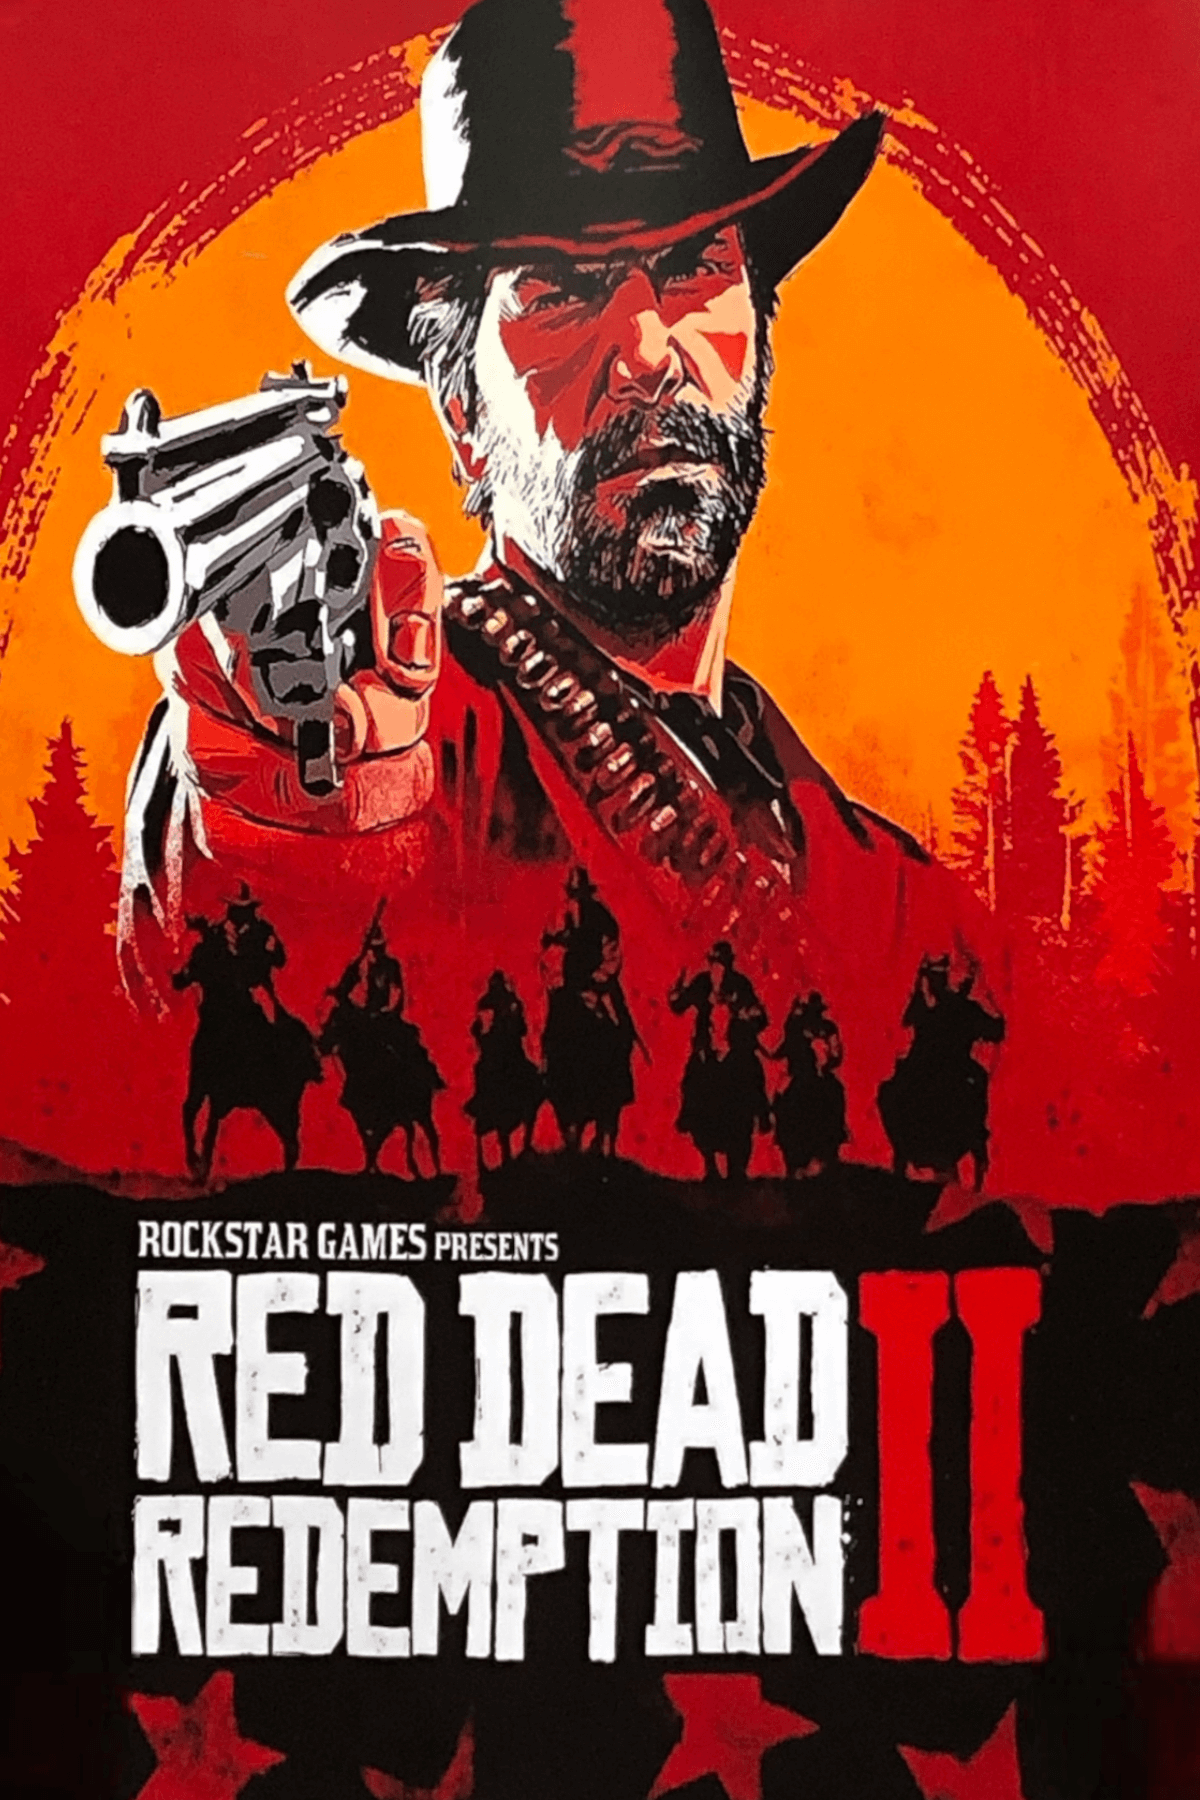 36" x 60" Red Dead Redemption 2 Tapestry Wall Hanging Décor